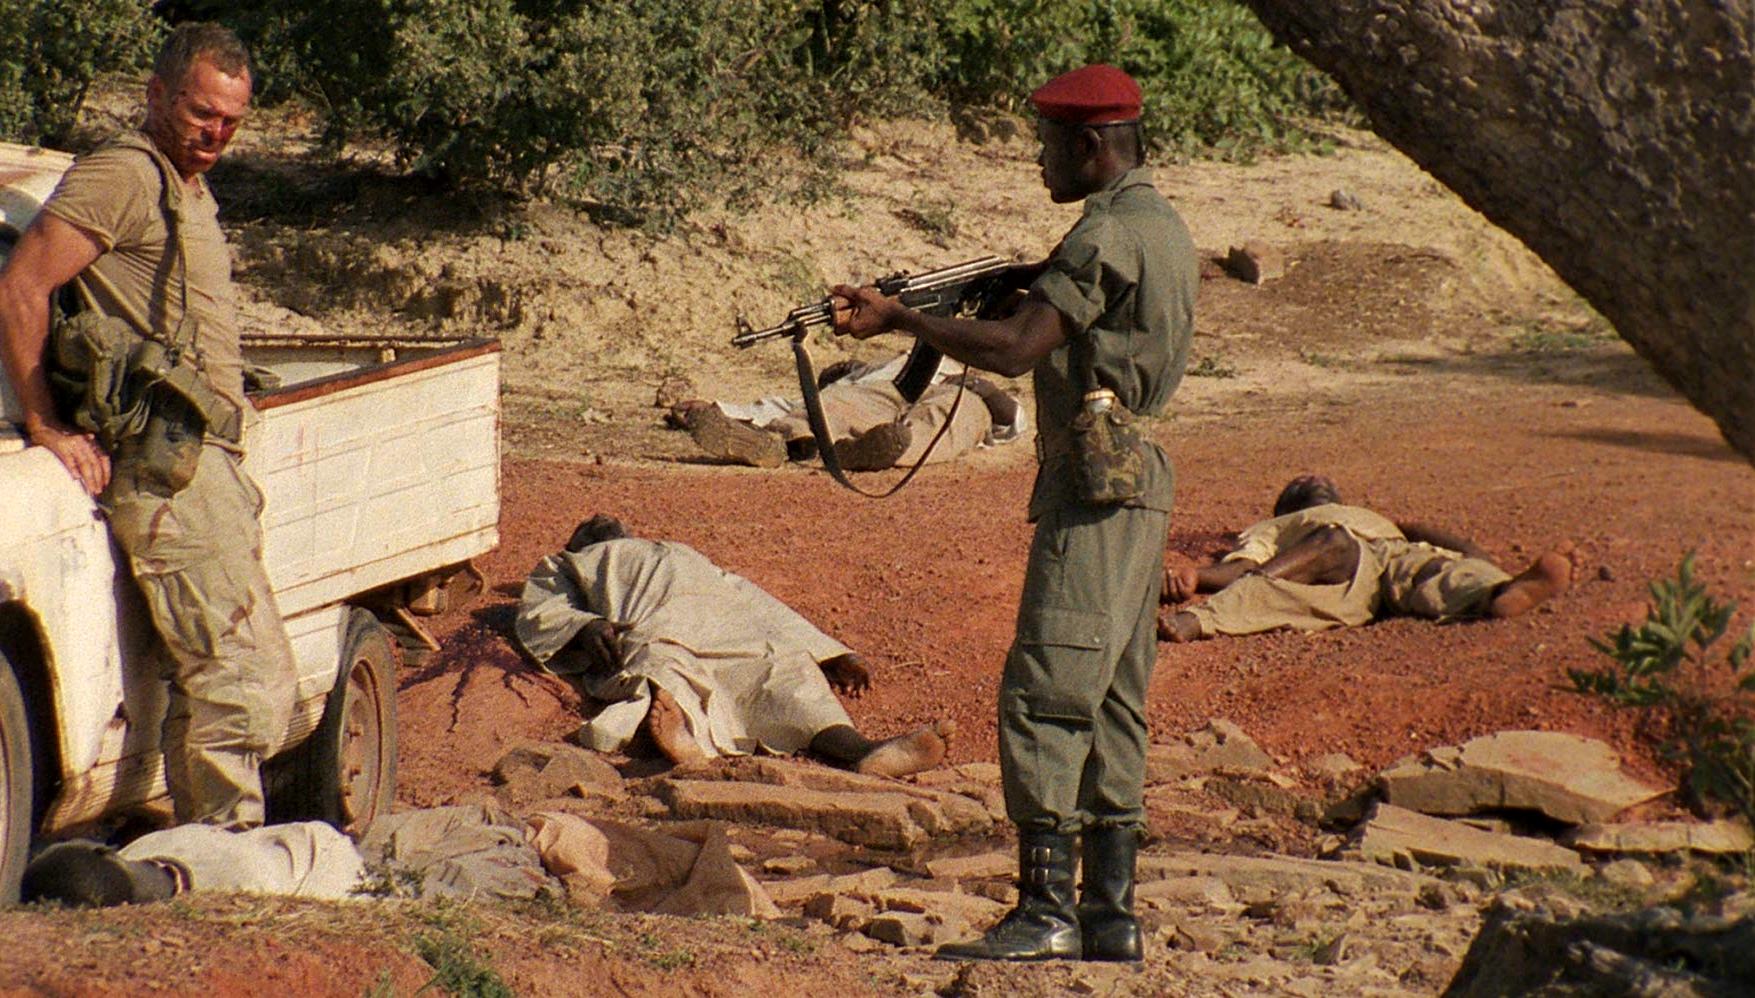 Tenuous truce between (l to r) Westerner Rob Freeman and local soldier Prince David Osei in The Dead (2010)